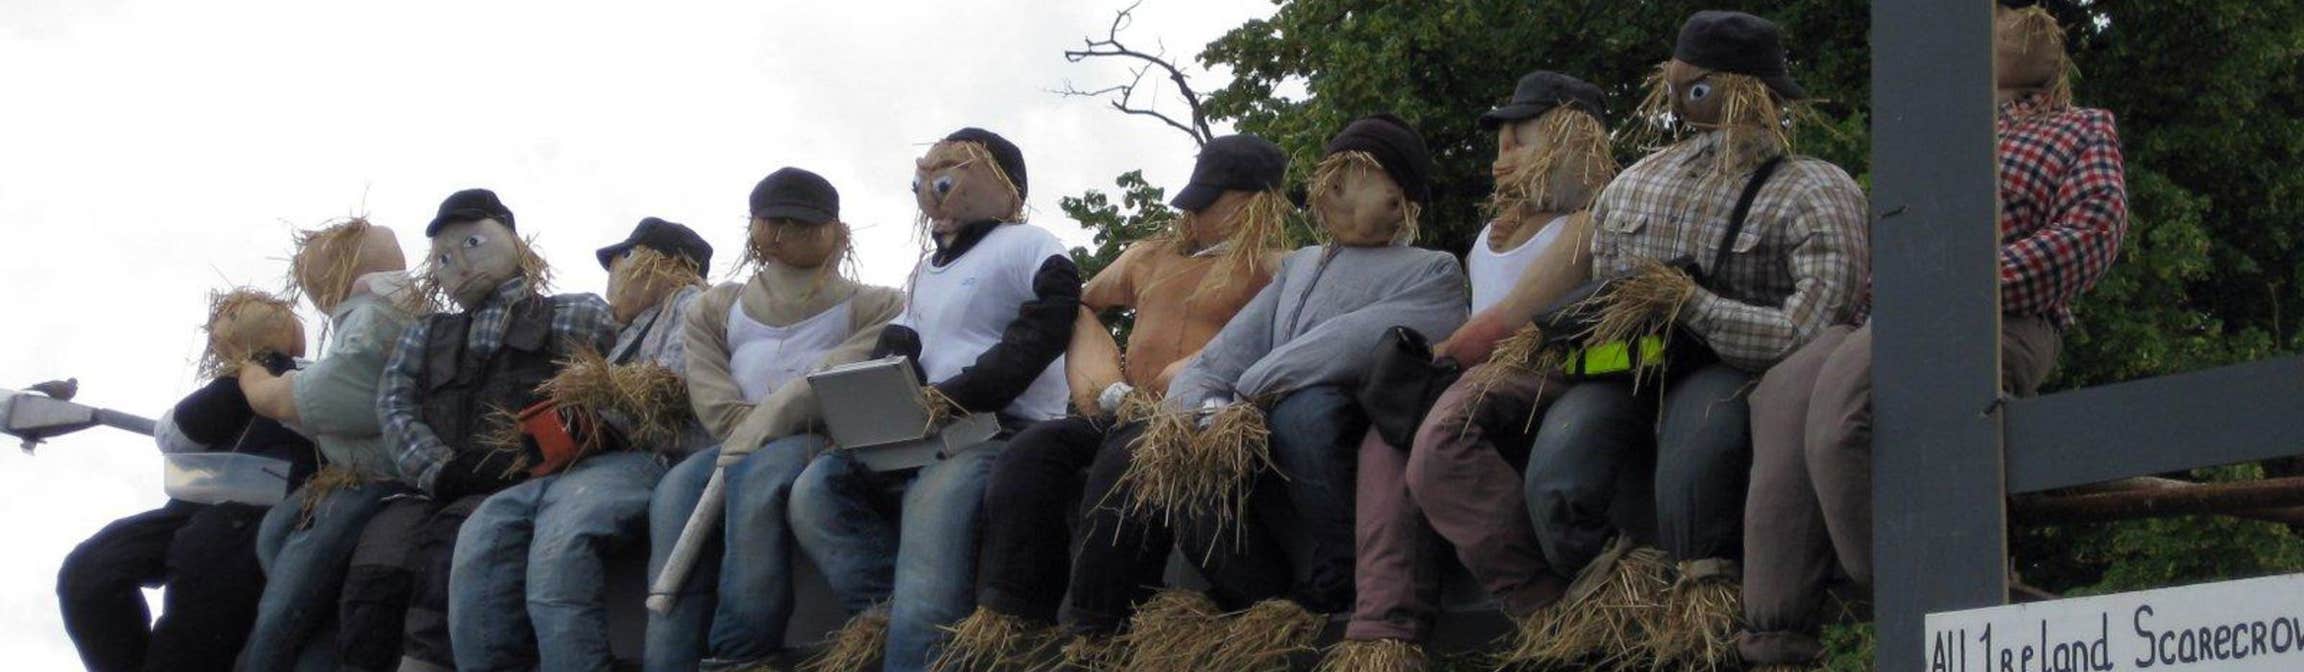 Image of the Scarecrow Festival in Durrow in County Laois